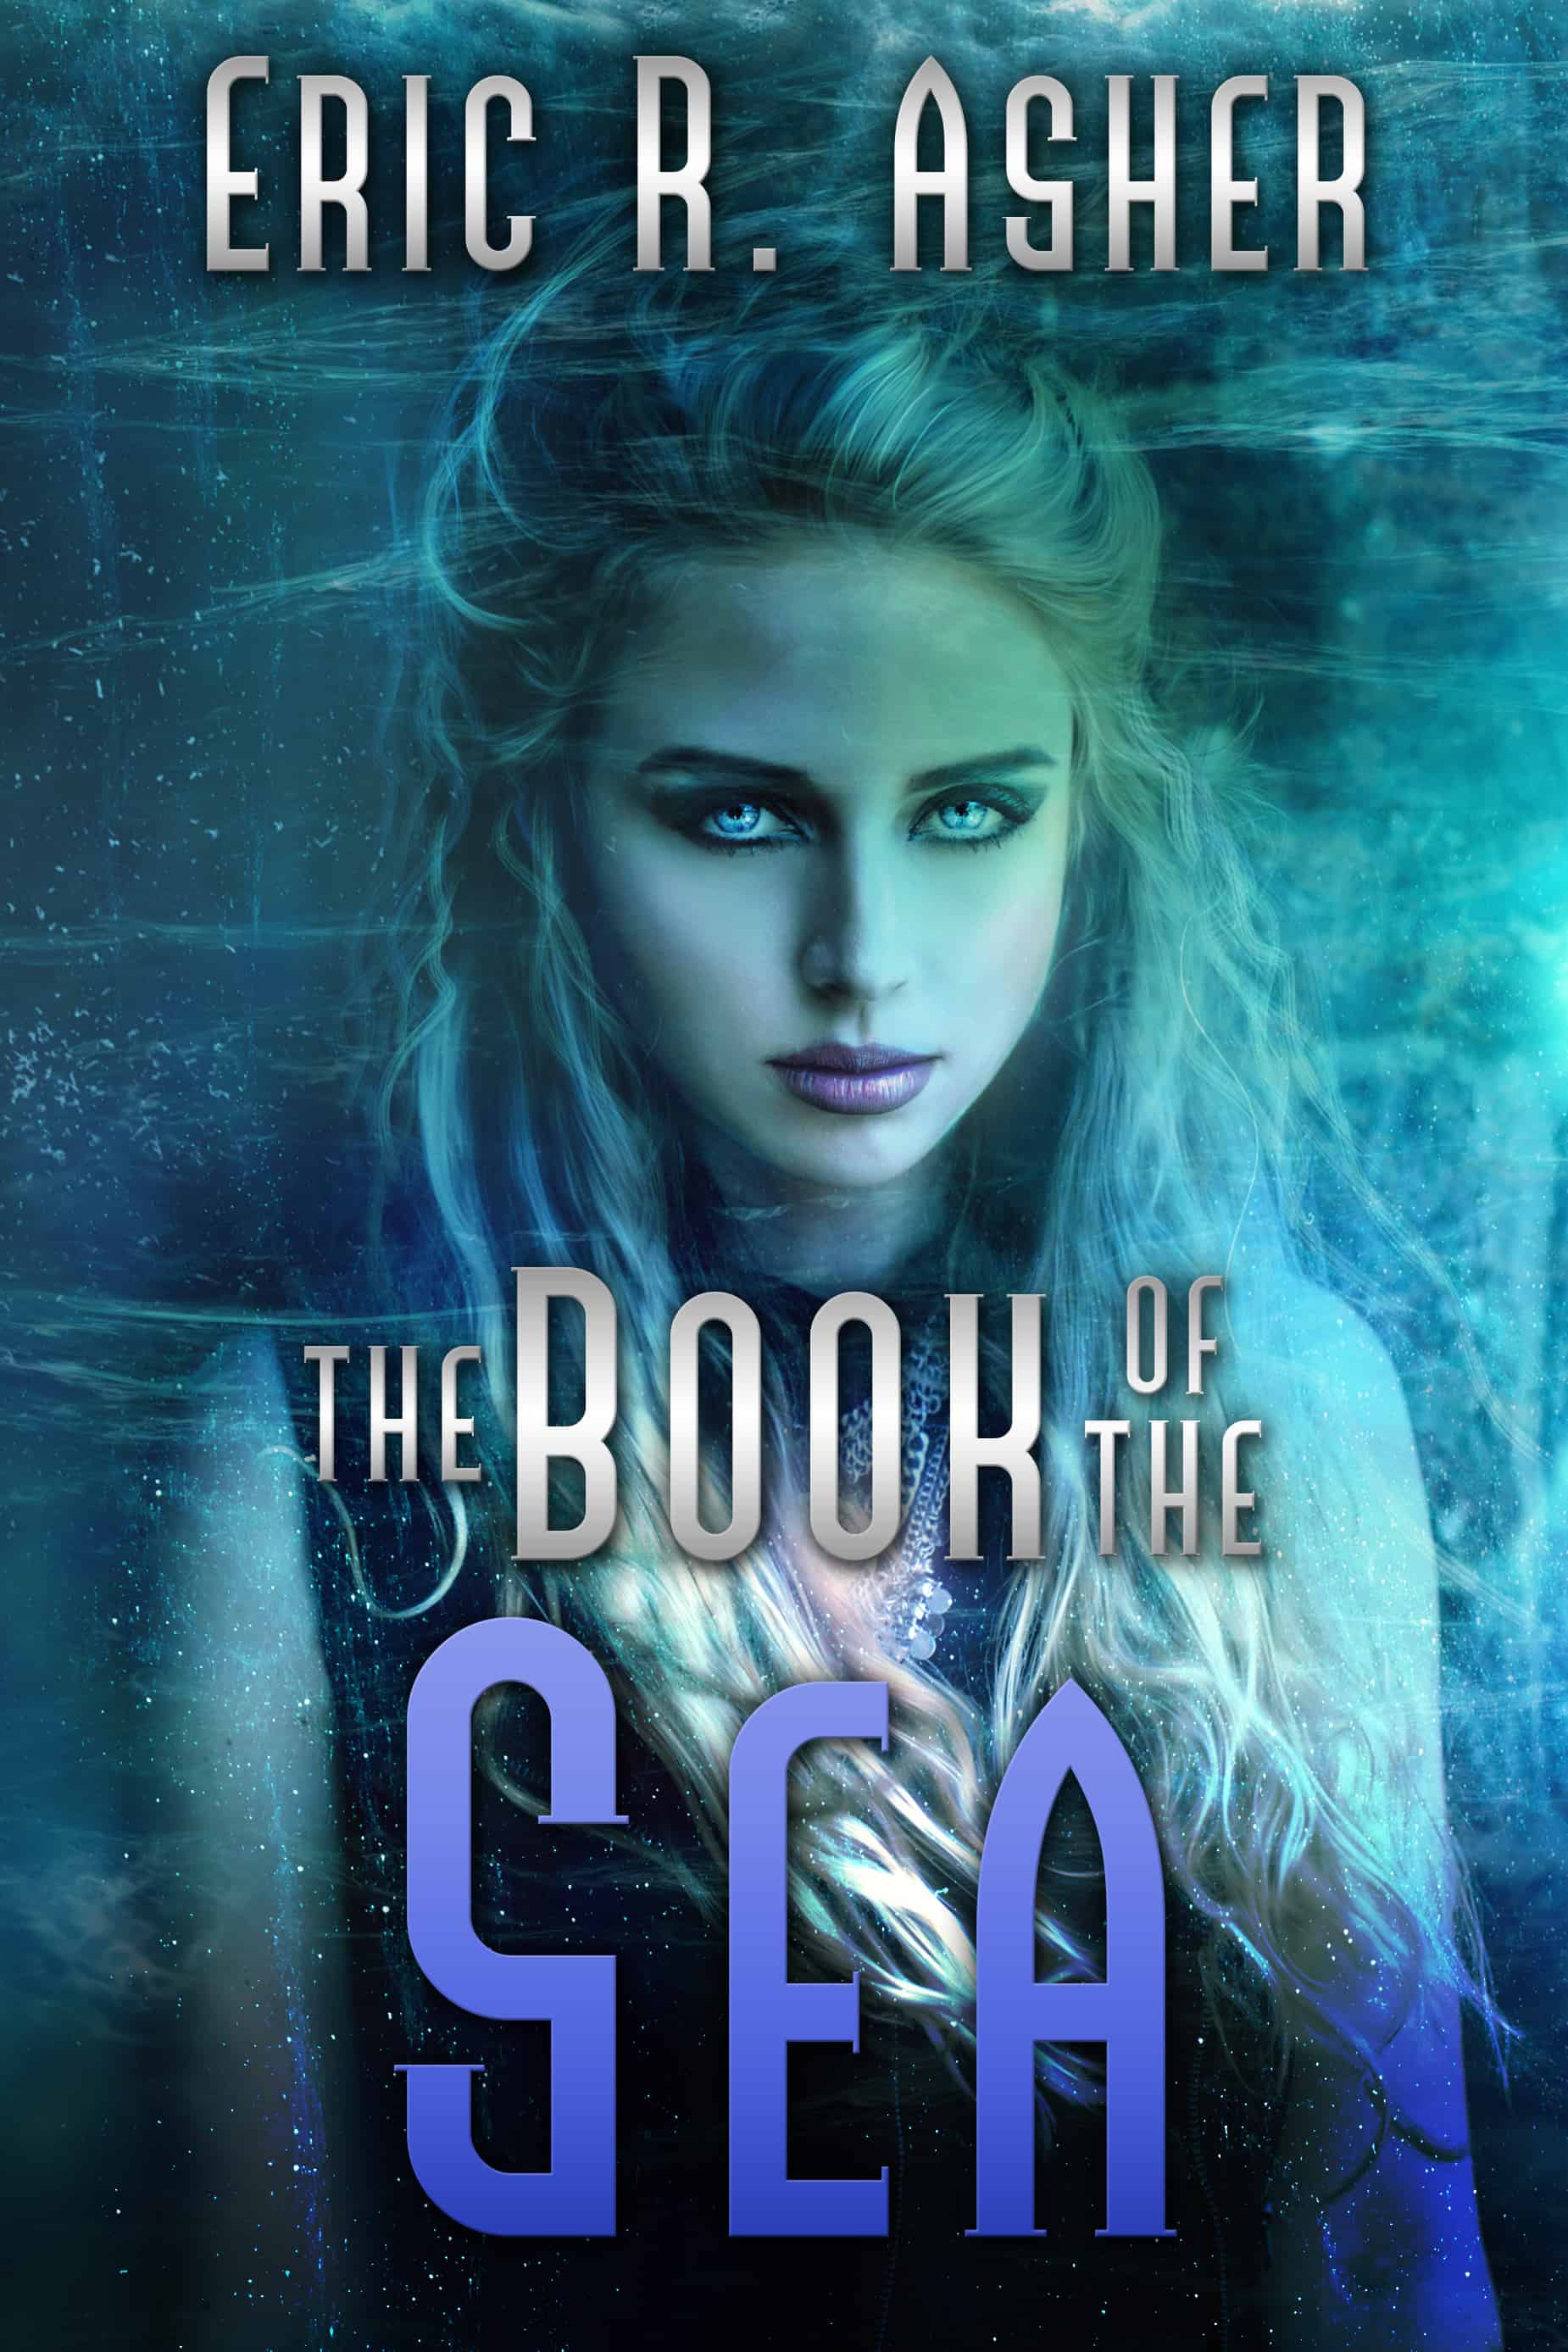 The Book of the Sea – Read the first three chapters today